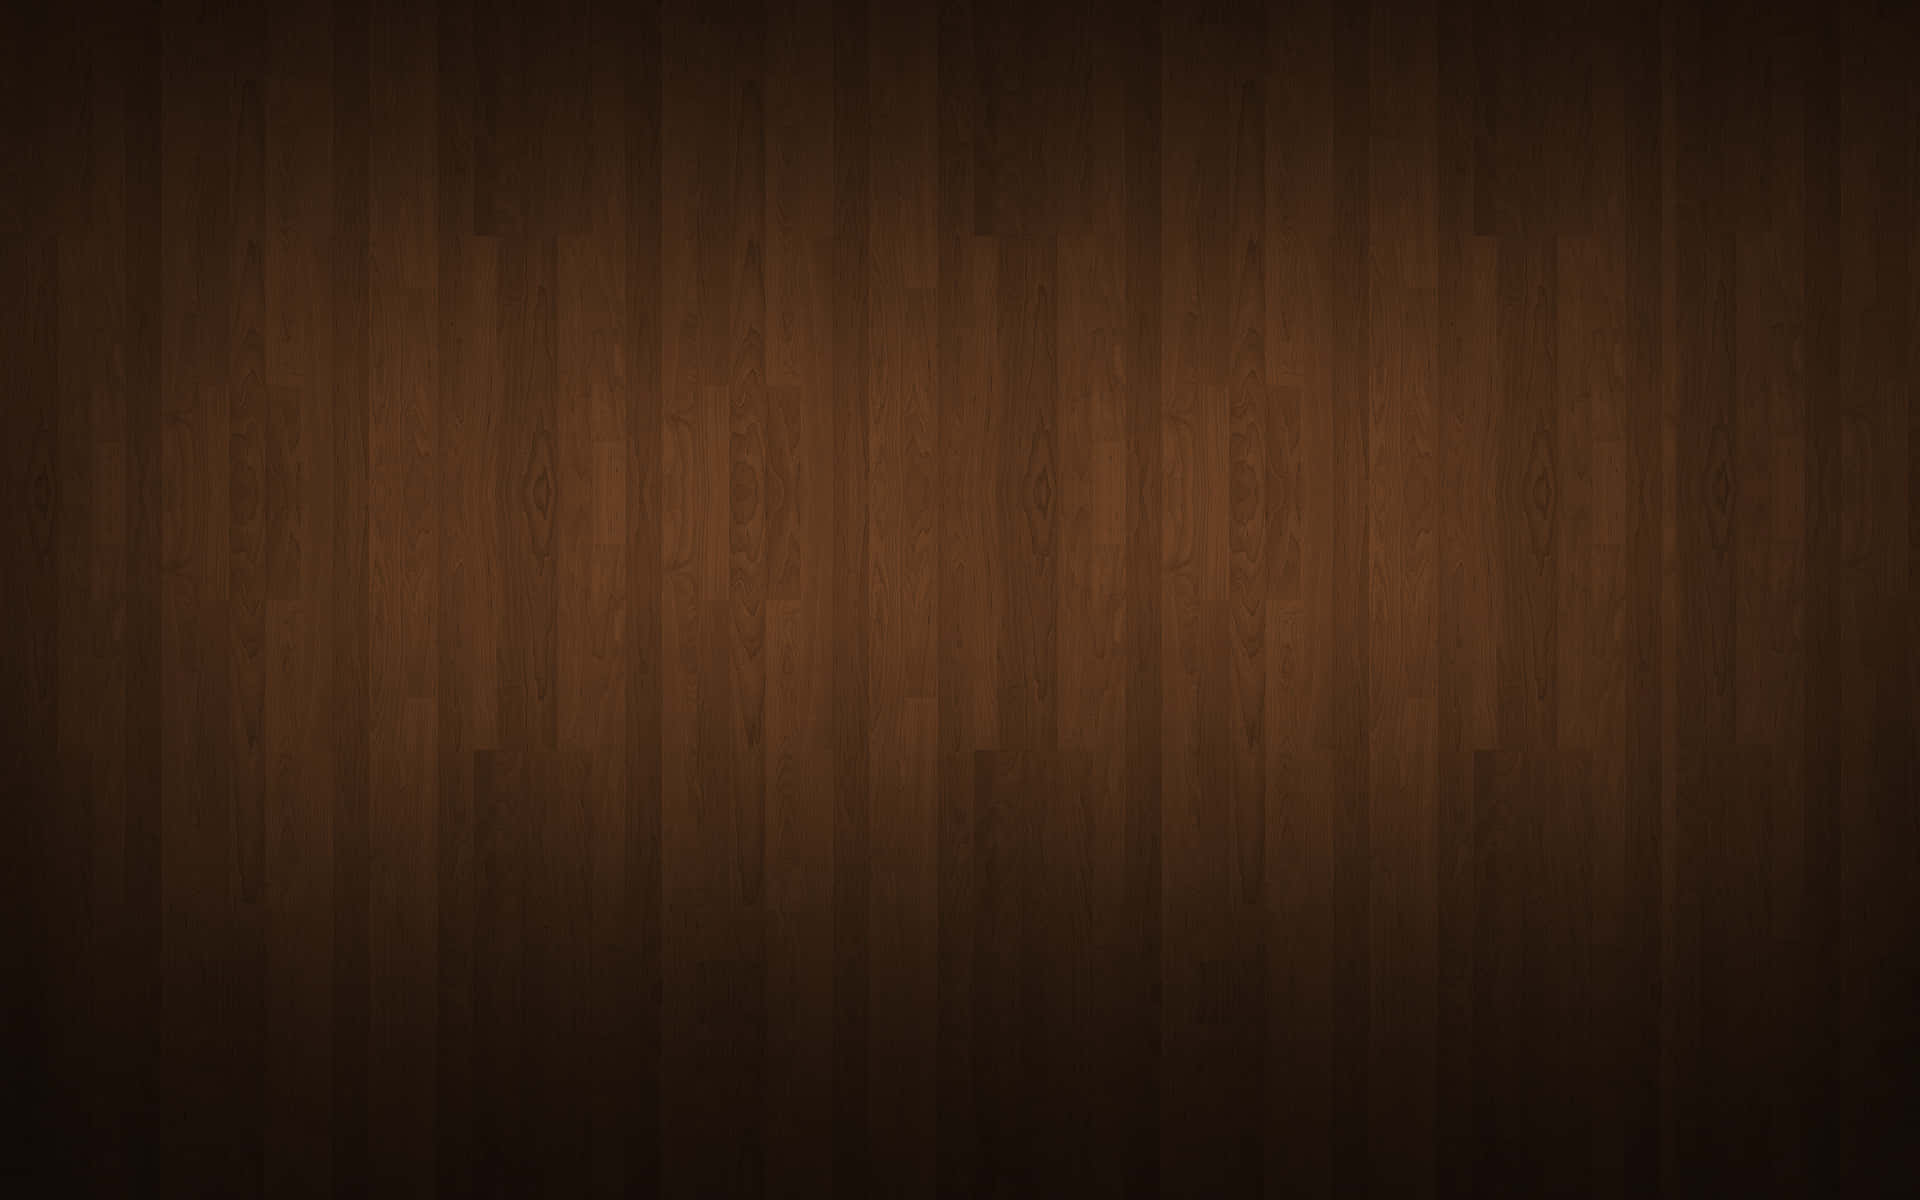 Featuring a high-quality, high-resolution wood background